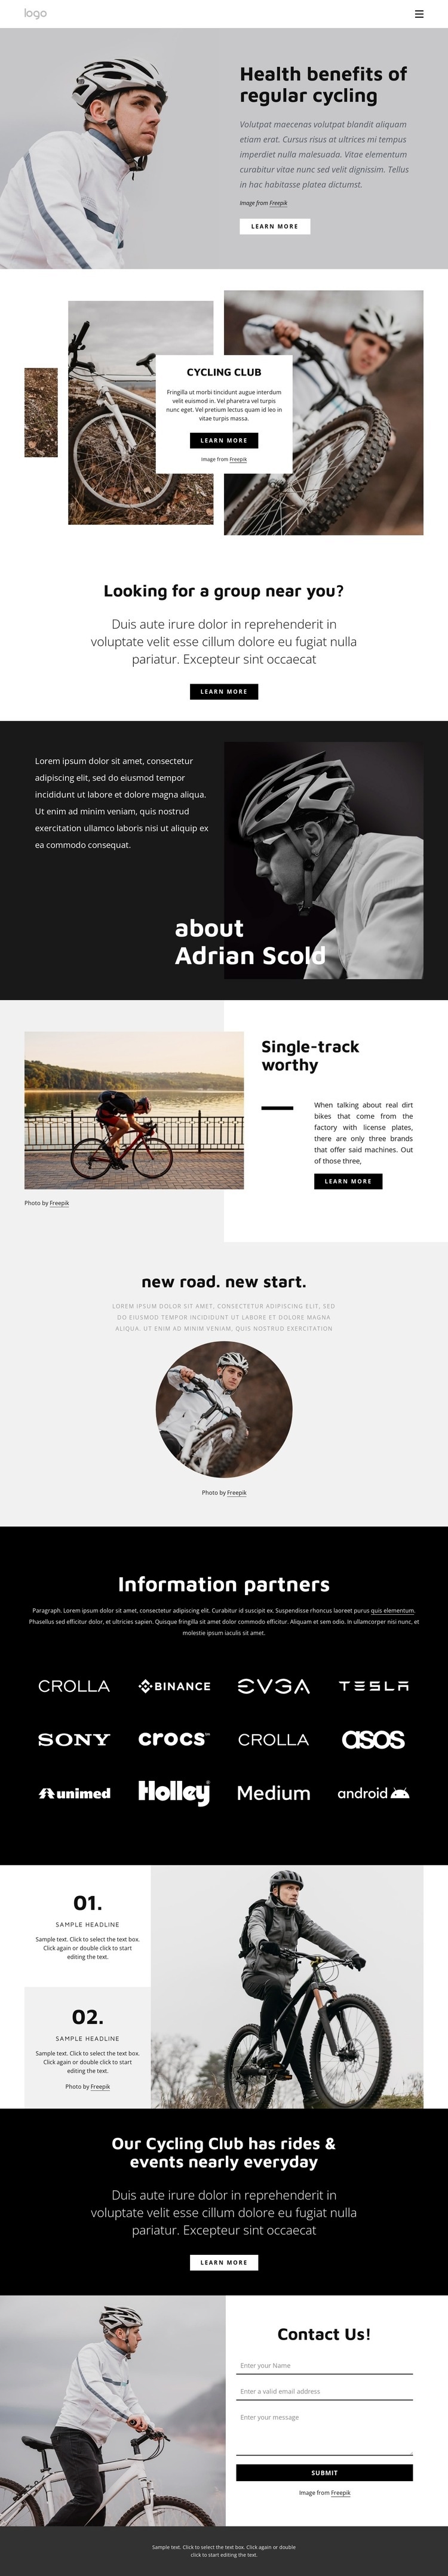 Benefits of regular cycling Web Page Design